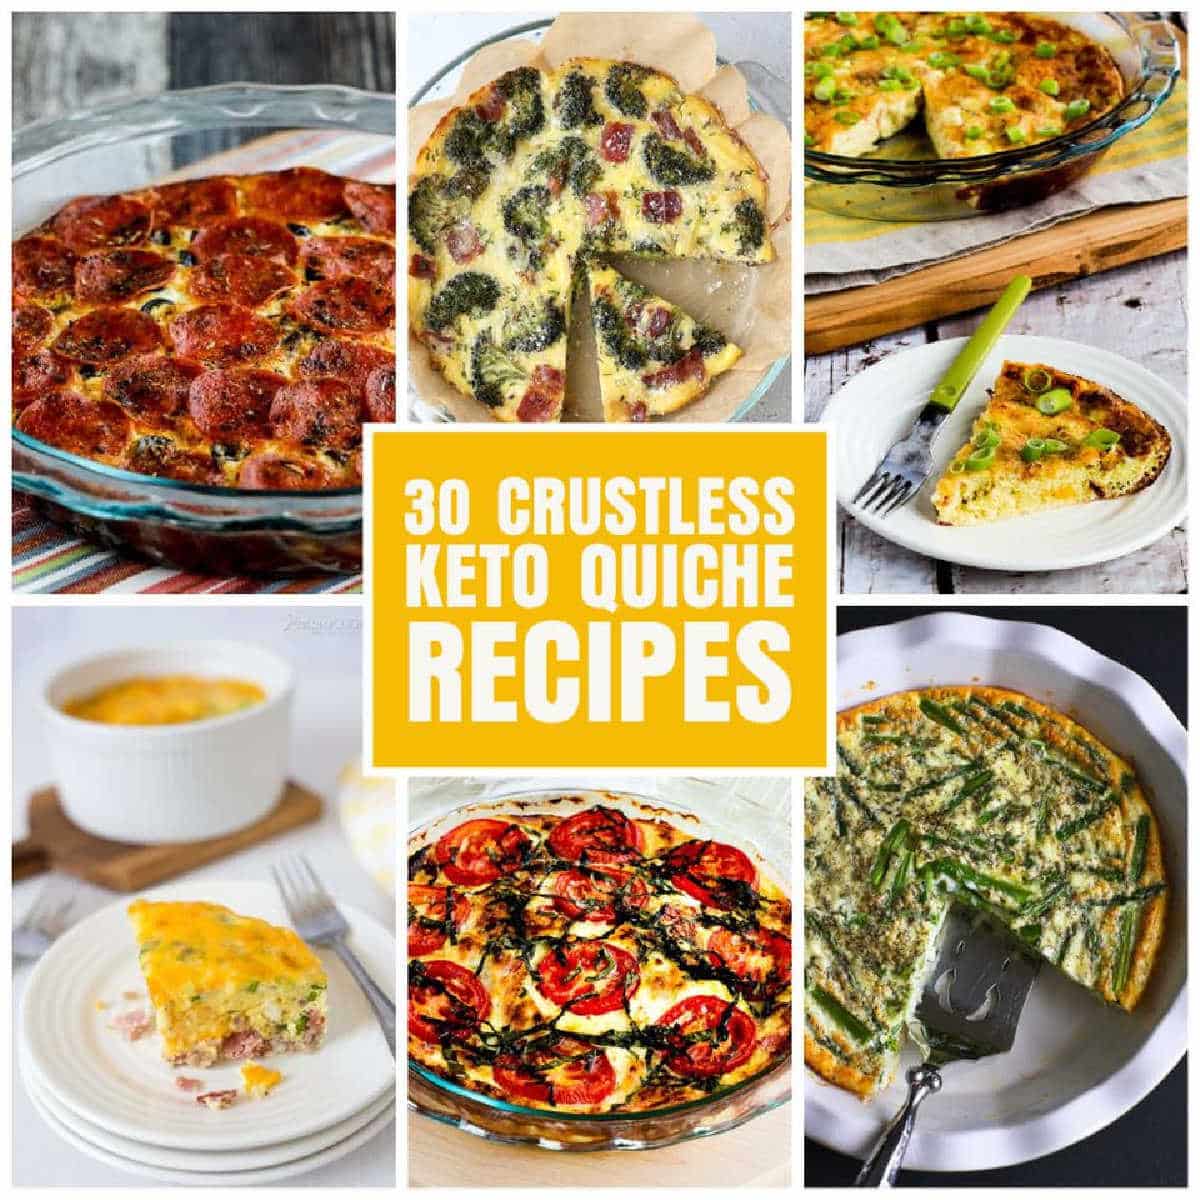 A collage of 30 crustless keto quiche recipes with photos of featured recipes.